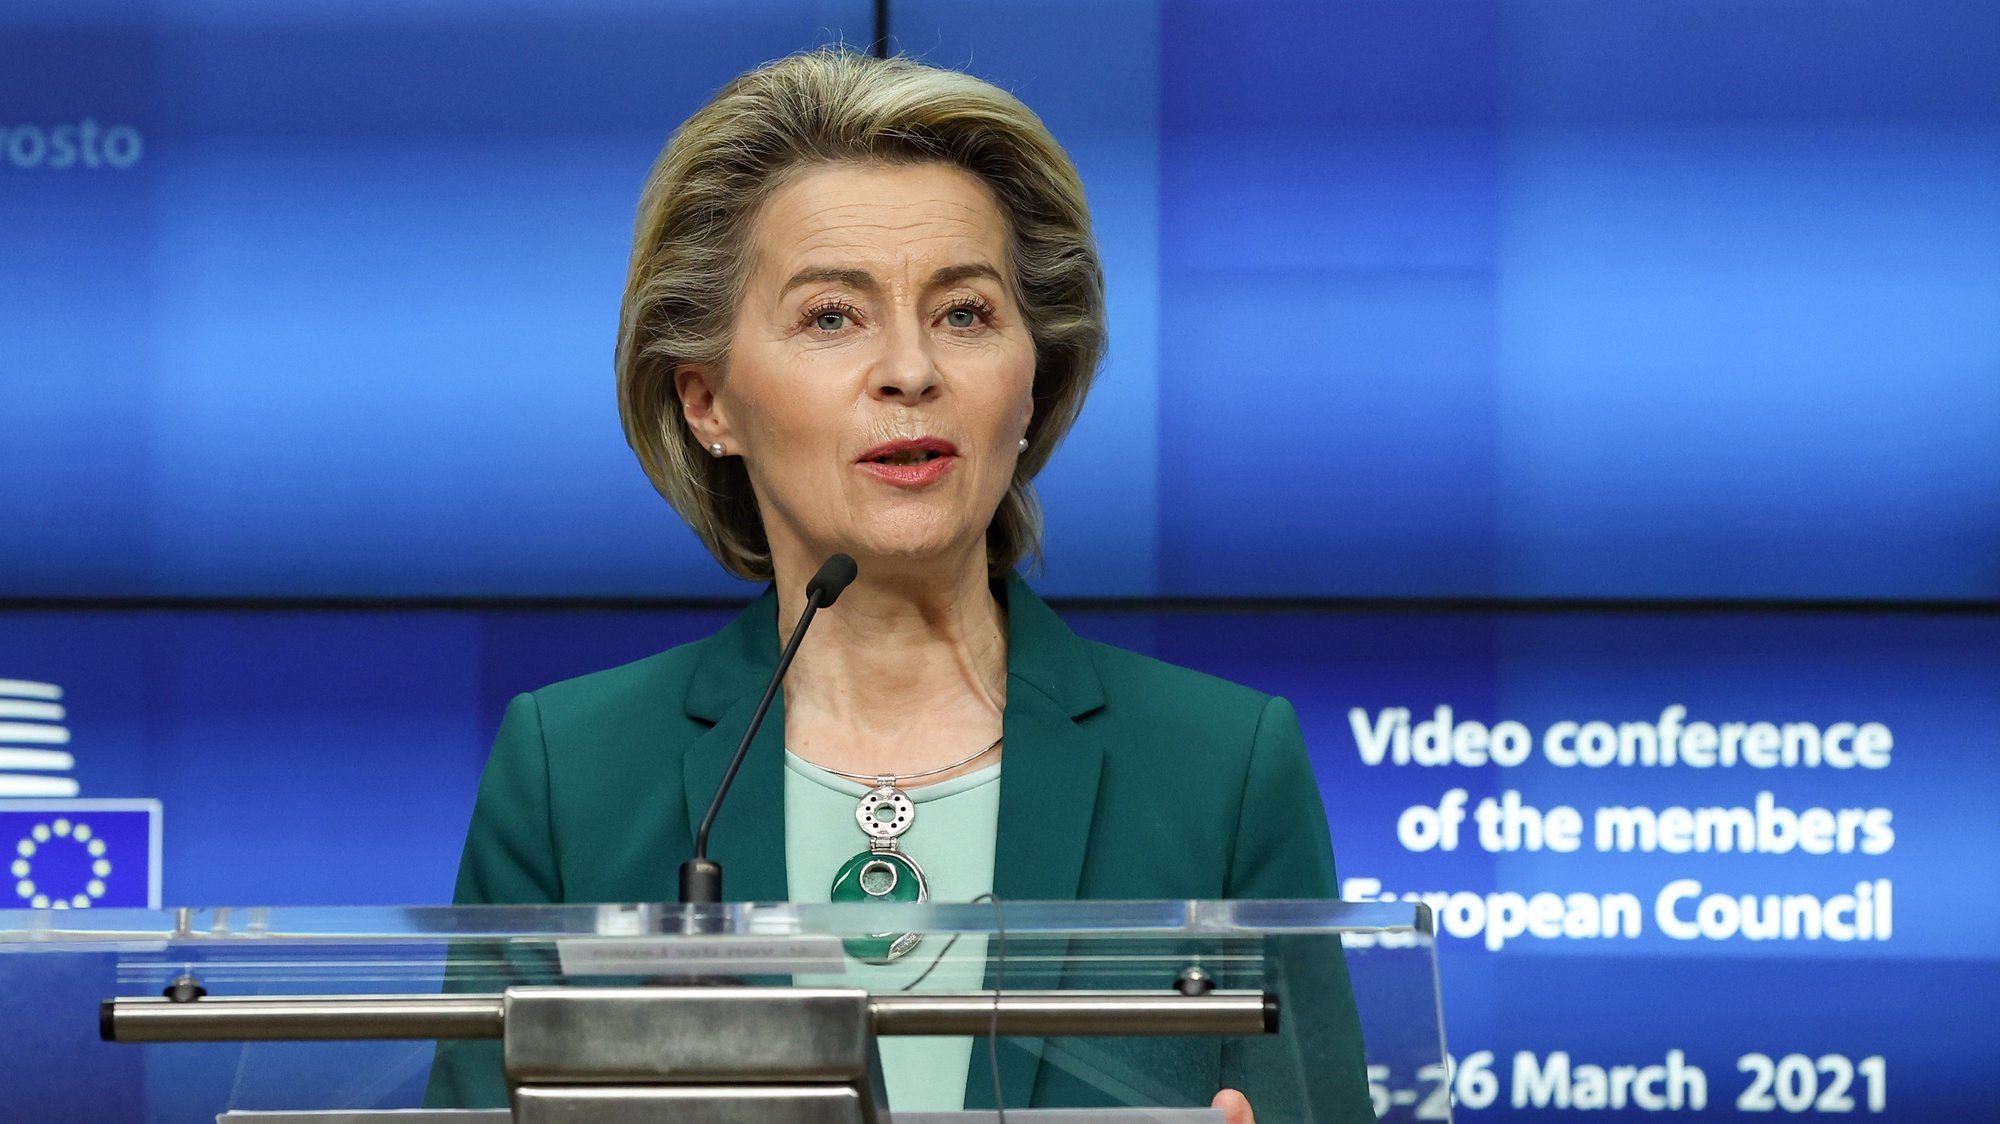 epa09097936 European Commission President Ursula von der Leyen speaks during a joint press conference with the European Council President Charles Michel (not pictured) at the end of the first day of a European Union (EU) summit over video conference at The European Council Building in Brussels, Belgium, 25 March 2021. A looming third wave of coronavirus and Europe&#039;s struggles to mount a vaccination drive is to dominate the EU video summit, despite a welcome guest appearance by the US President.  EPA/ARIS OIKONOMOU / POOL